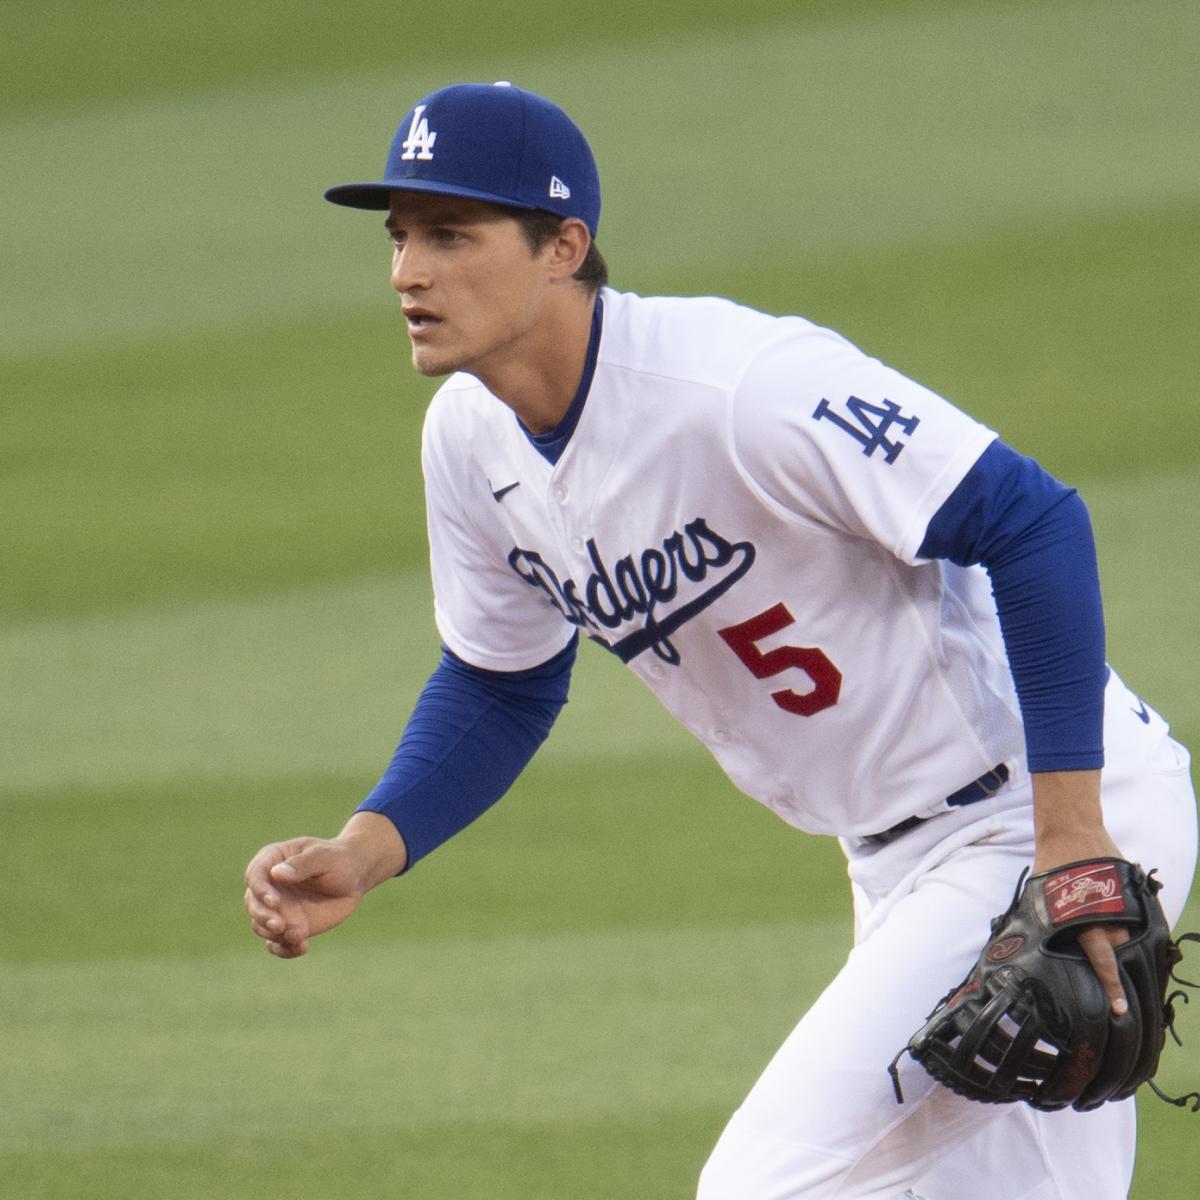 Bleacher Report - Corey Seager has been going OFF in the